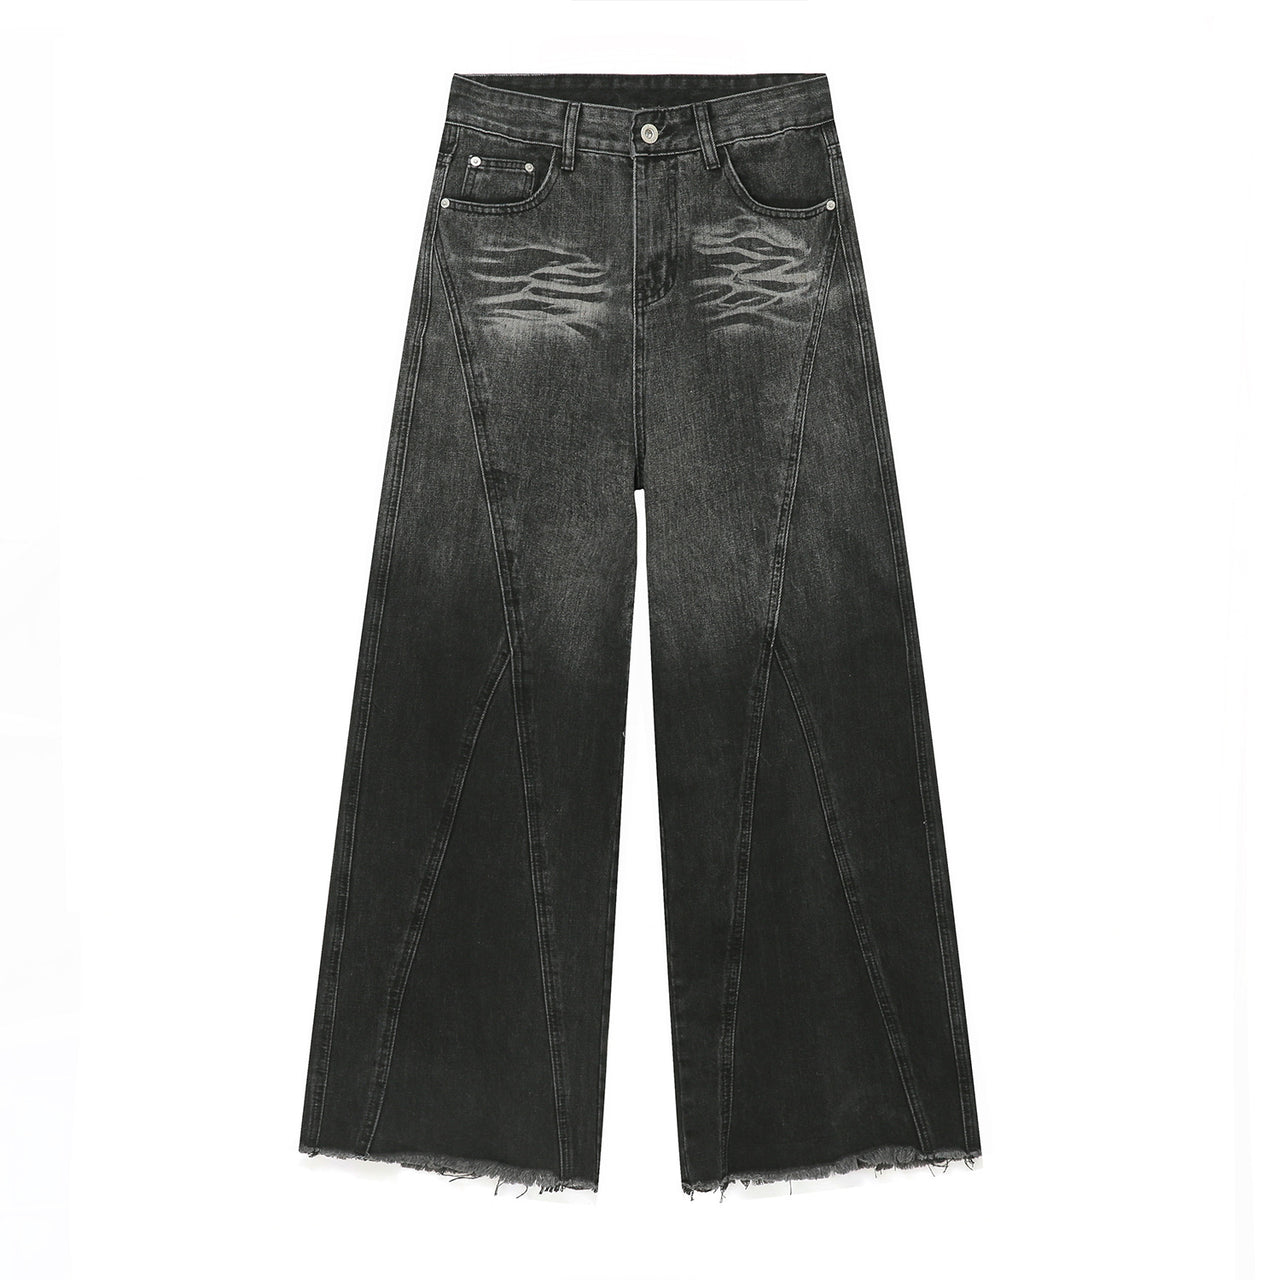 American Street Patchwork Design Sense Loose Washed-out Jeans